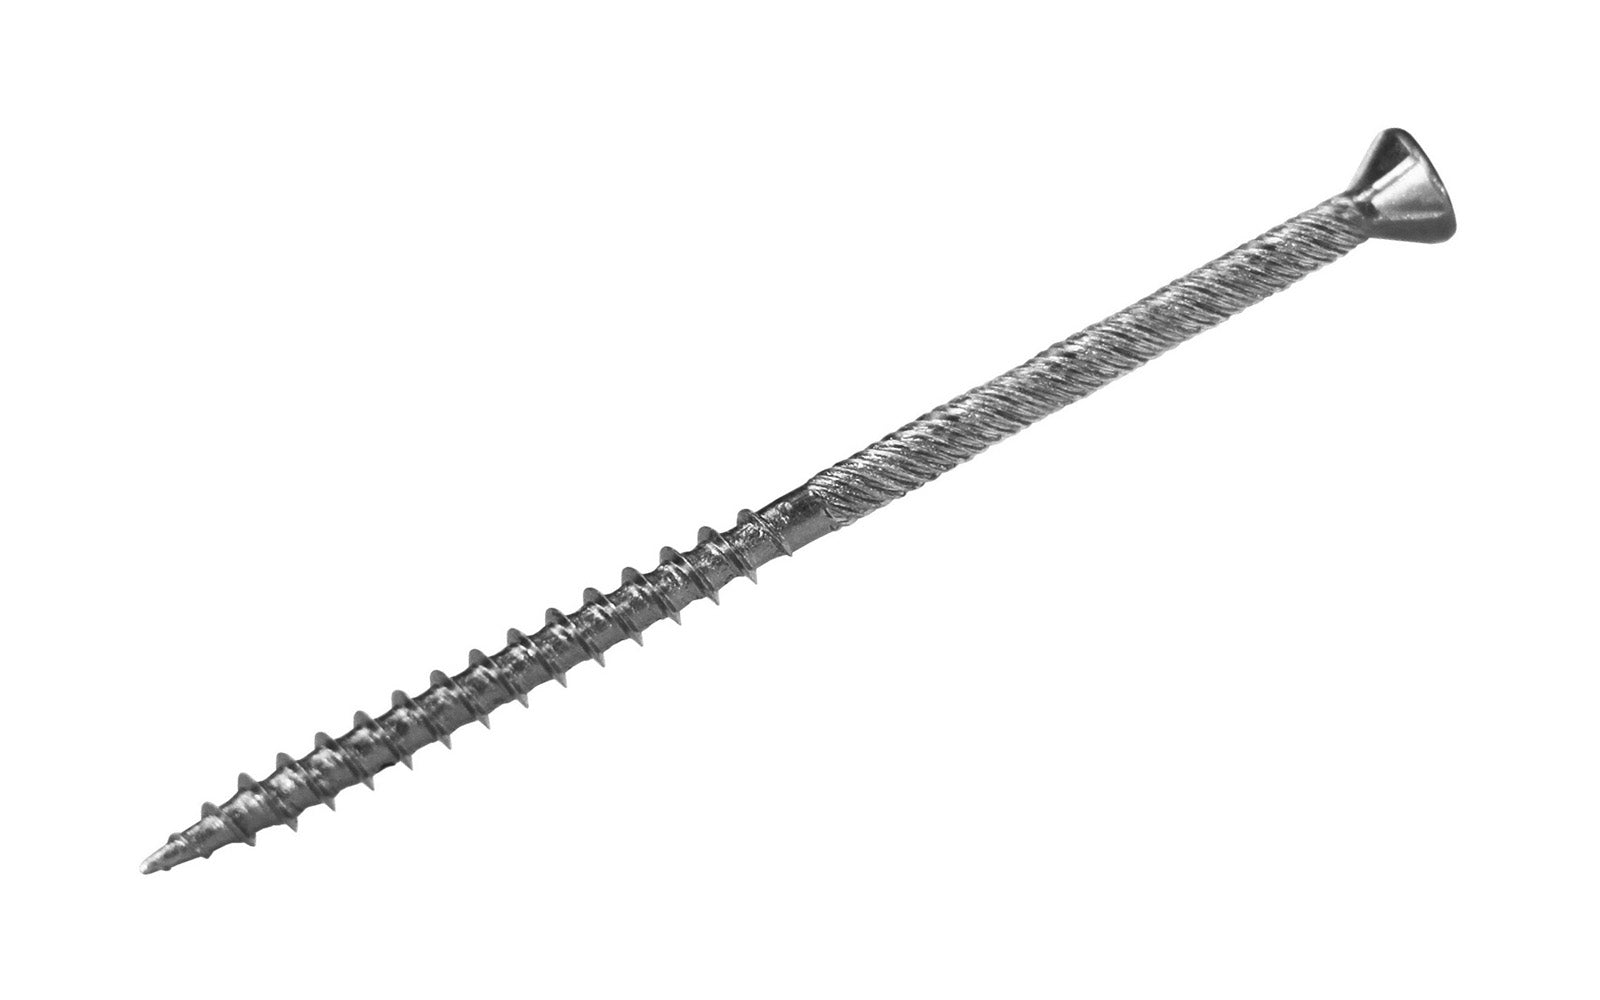 FastCap Micro Trim Screws ~ 300 Pack. It is extremely slim with a tiny head. Ideal for pulling trim together; where nails would never provide sufficient holding power. 2